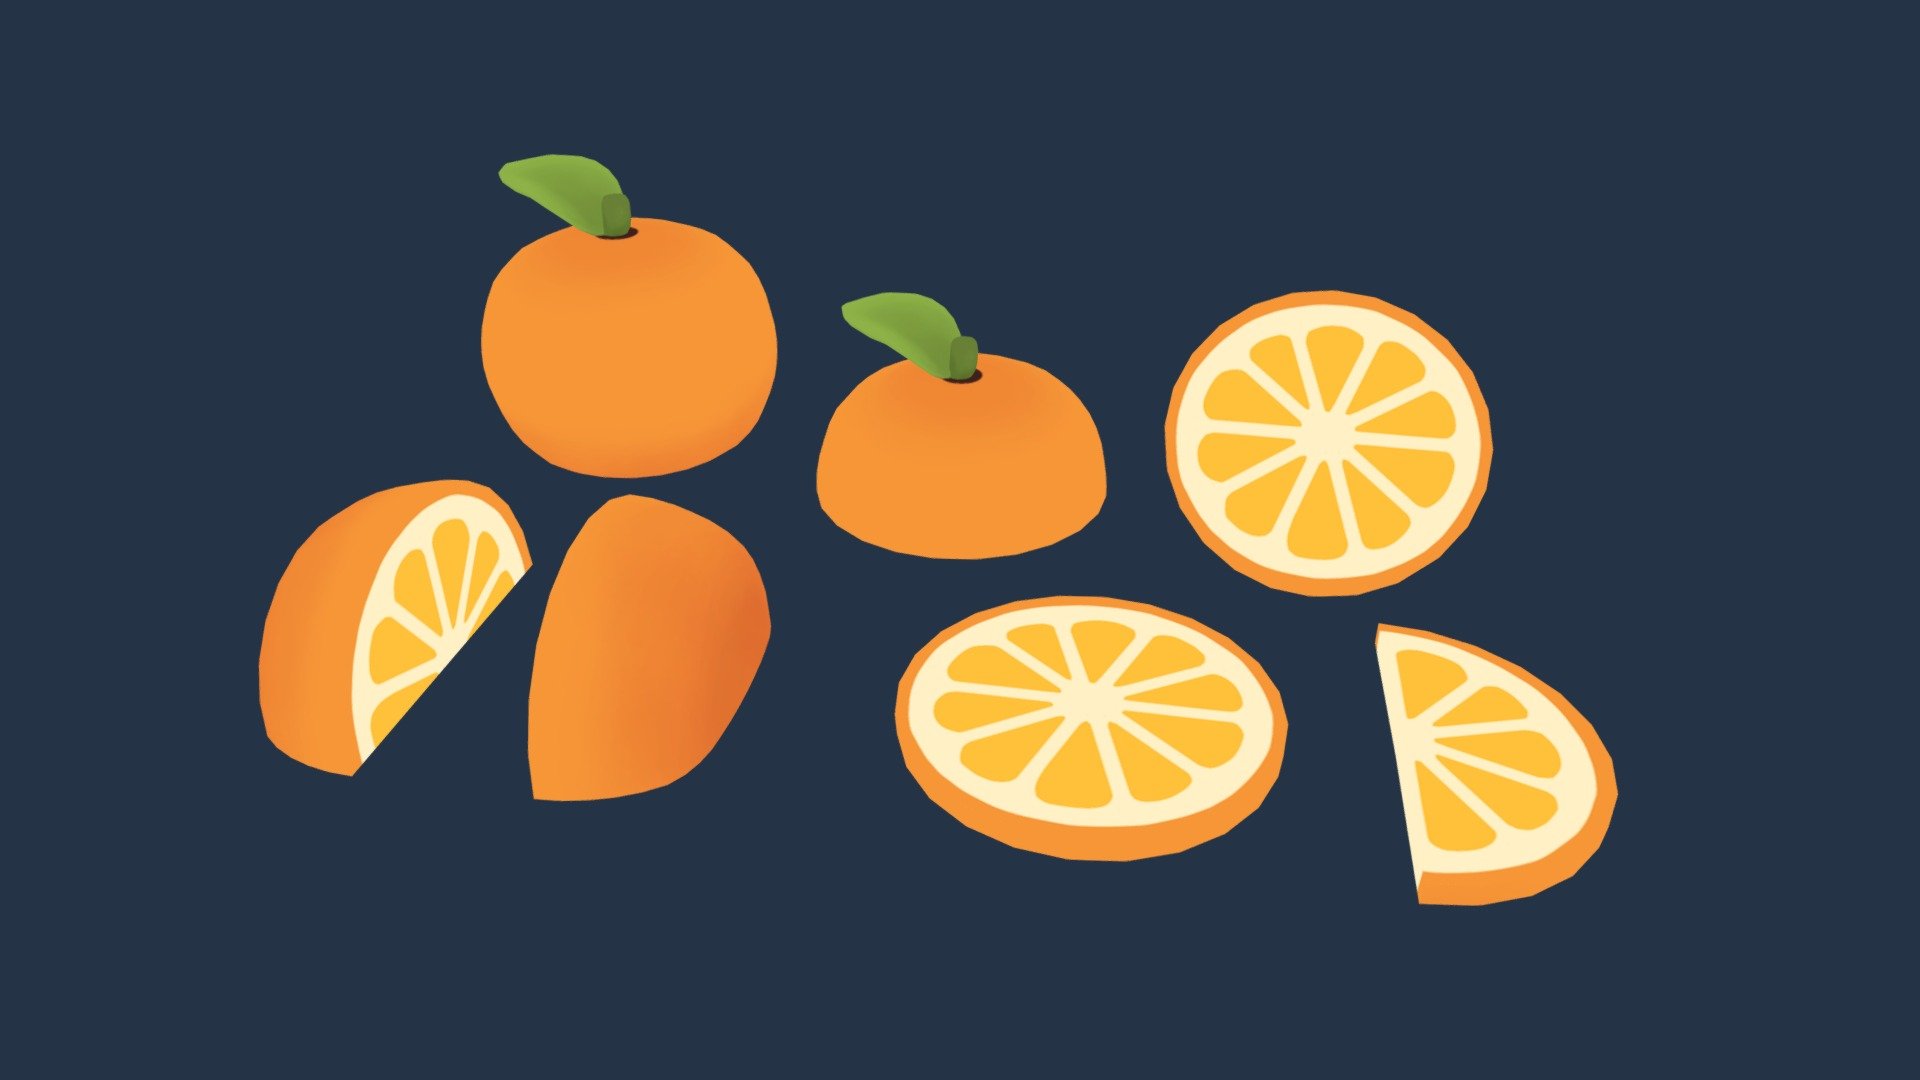 A cute, simple orange with a colourful, cartoon style 🍊

Part of the Cute Fruits Pack! See the full model pack here 👑✨

Includes:

1 whole orange mesh

2 half orange meshes

2 quarter orange meshes

2 orange slice meshes

2 texture .pngs

Zip file contains the models as an .fbx file - Cute Orange - Buy Royalty Free 3D model by pixelatedcrown 3d model